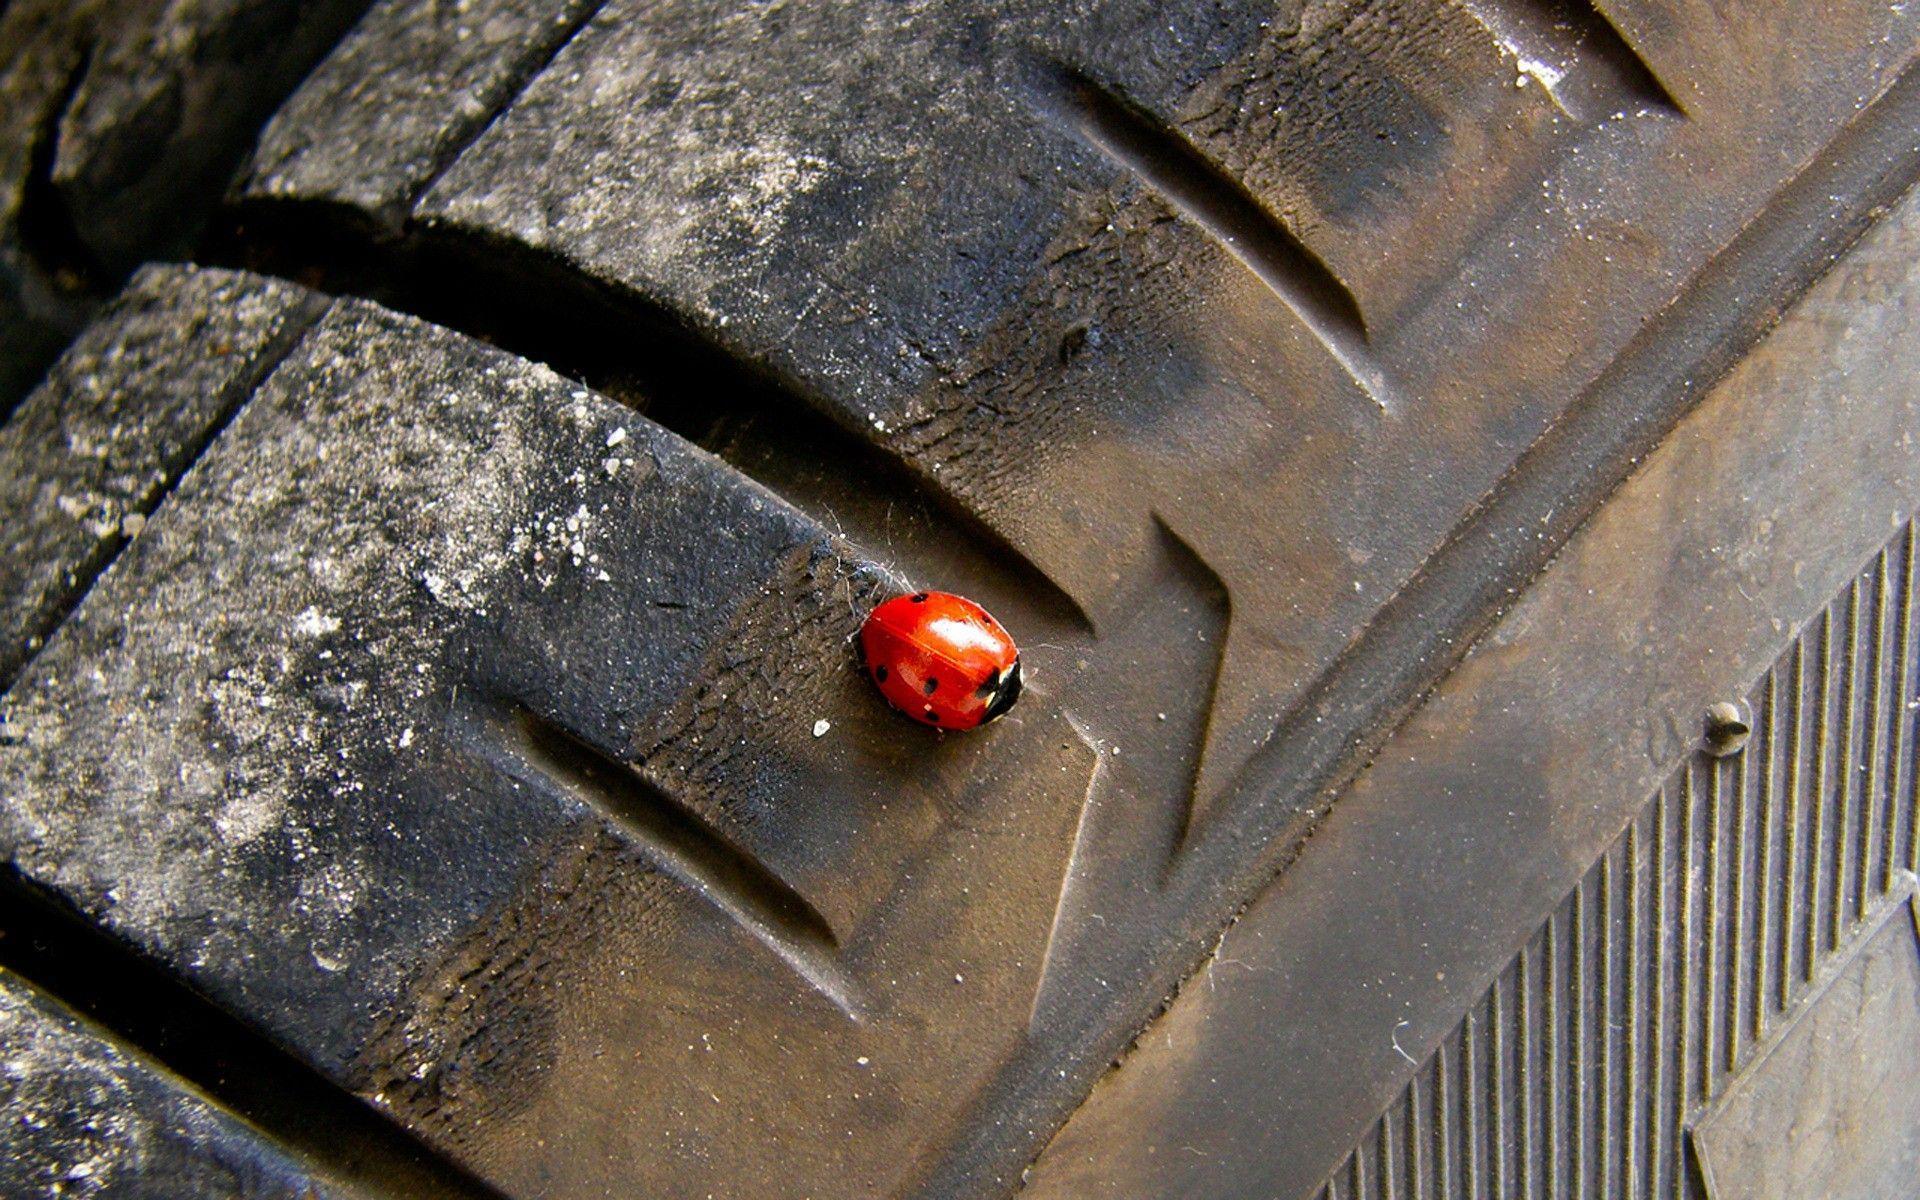 Download the Lady Bug Tire Wallpaper, Lady Bug Tire iPhone